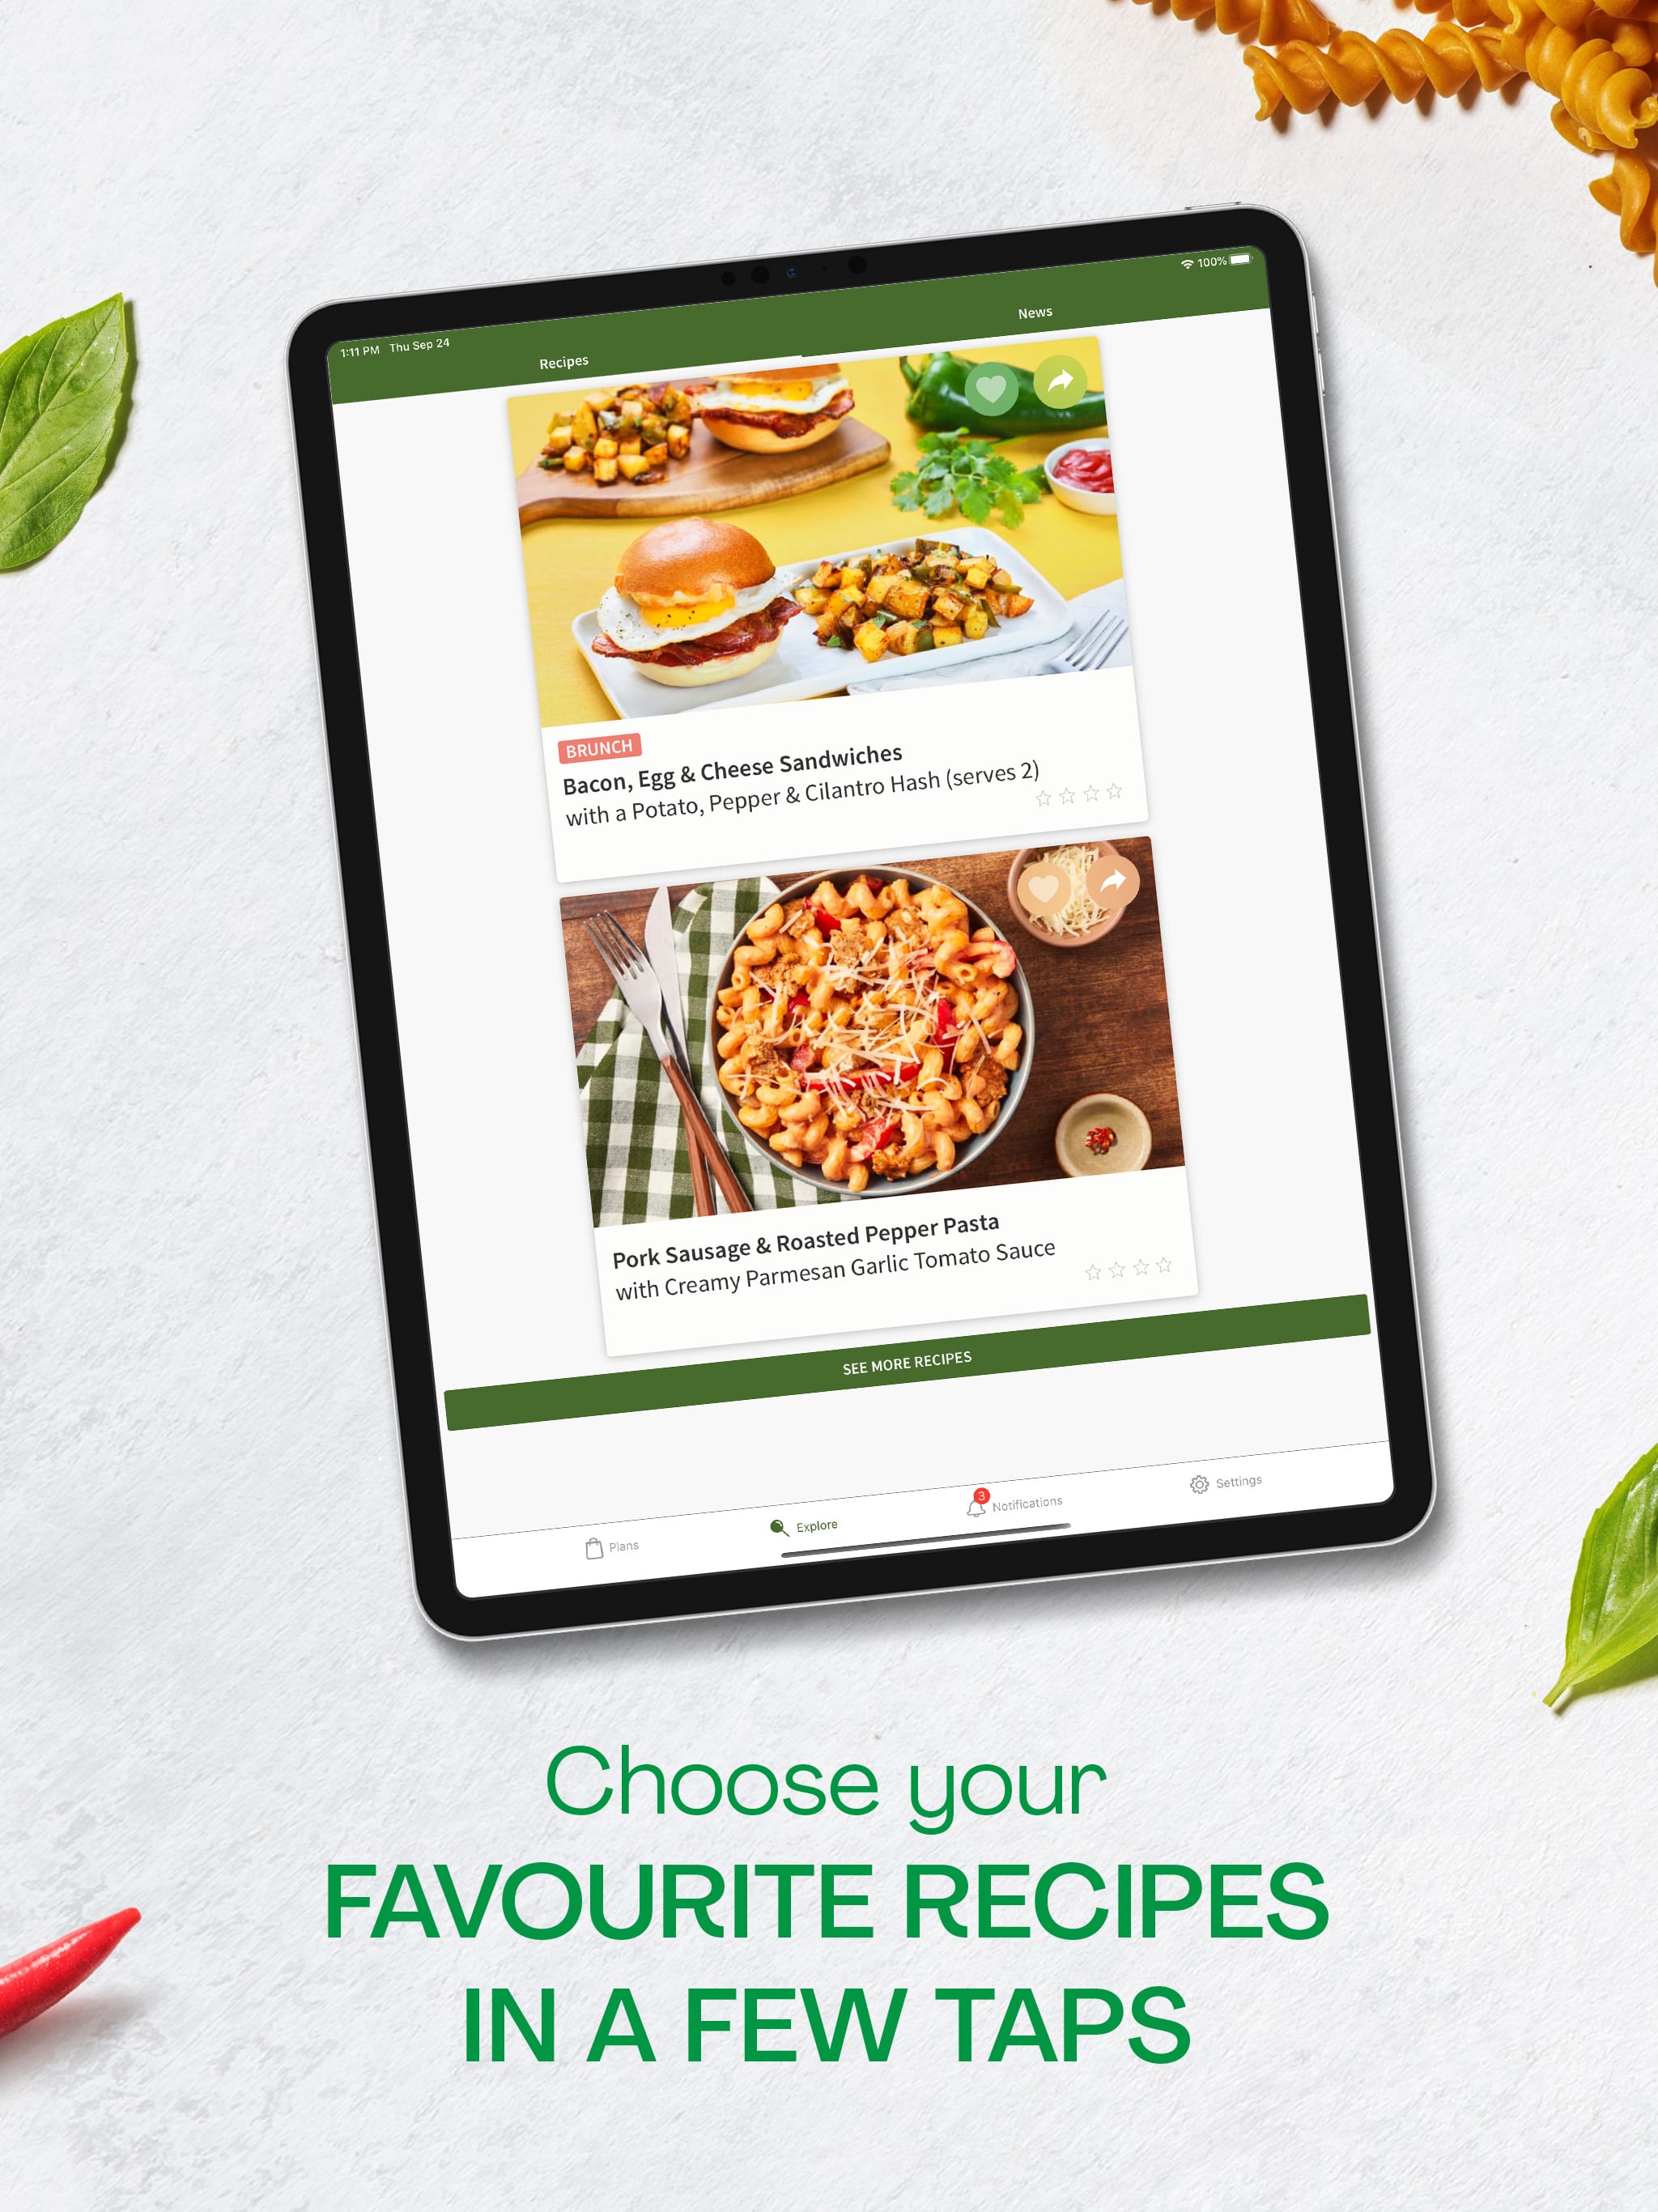 <h2>Healthy meals made easy</h2>